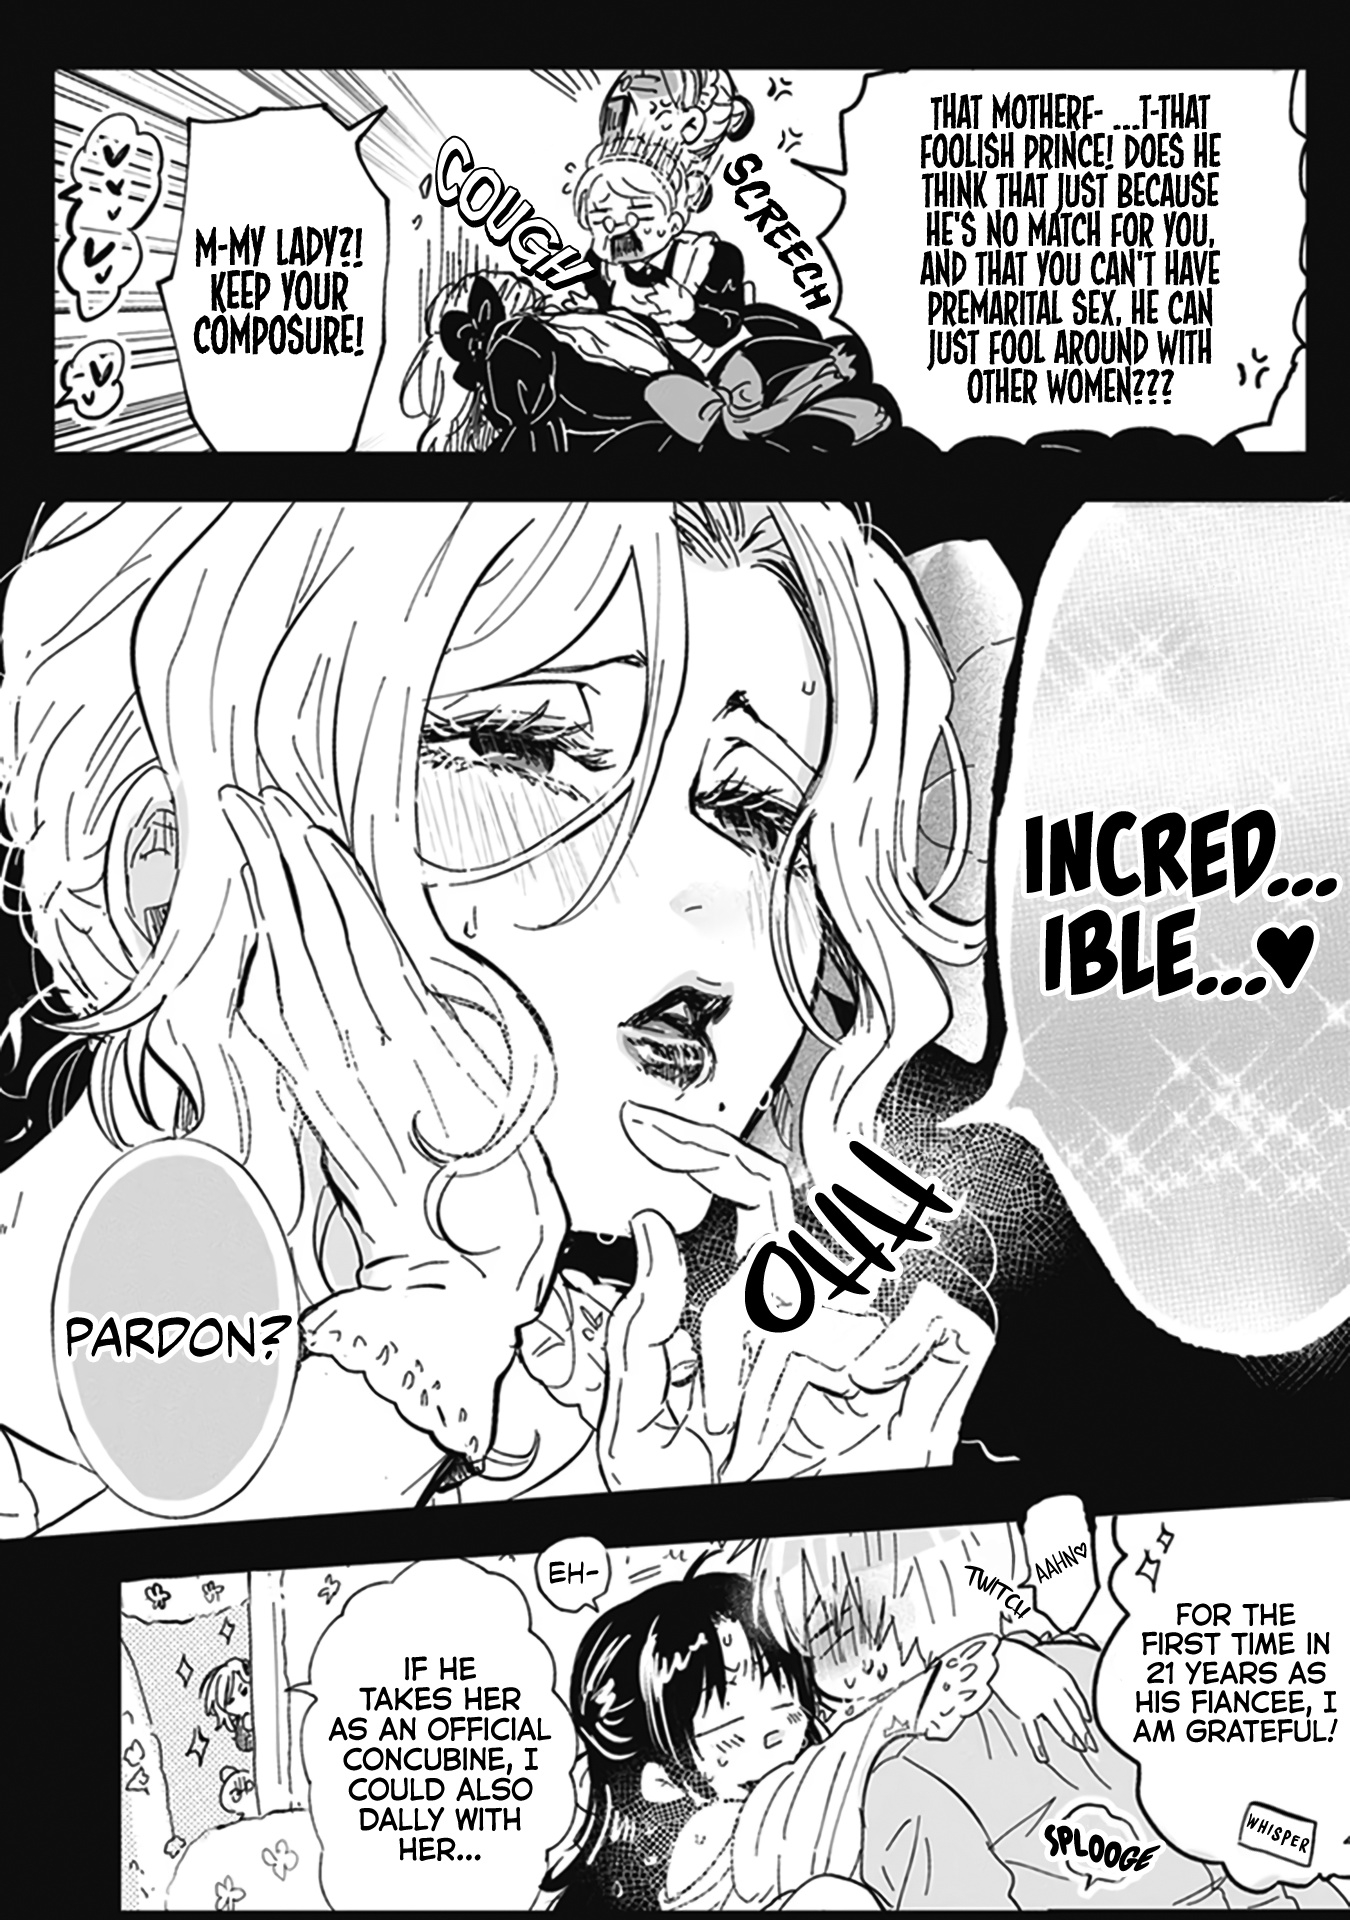 The Villainess Who Steals The Heroine's Heart - Page 2